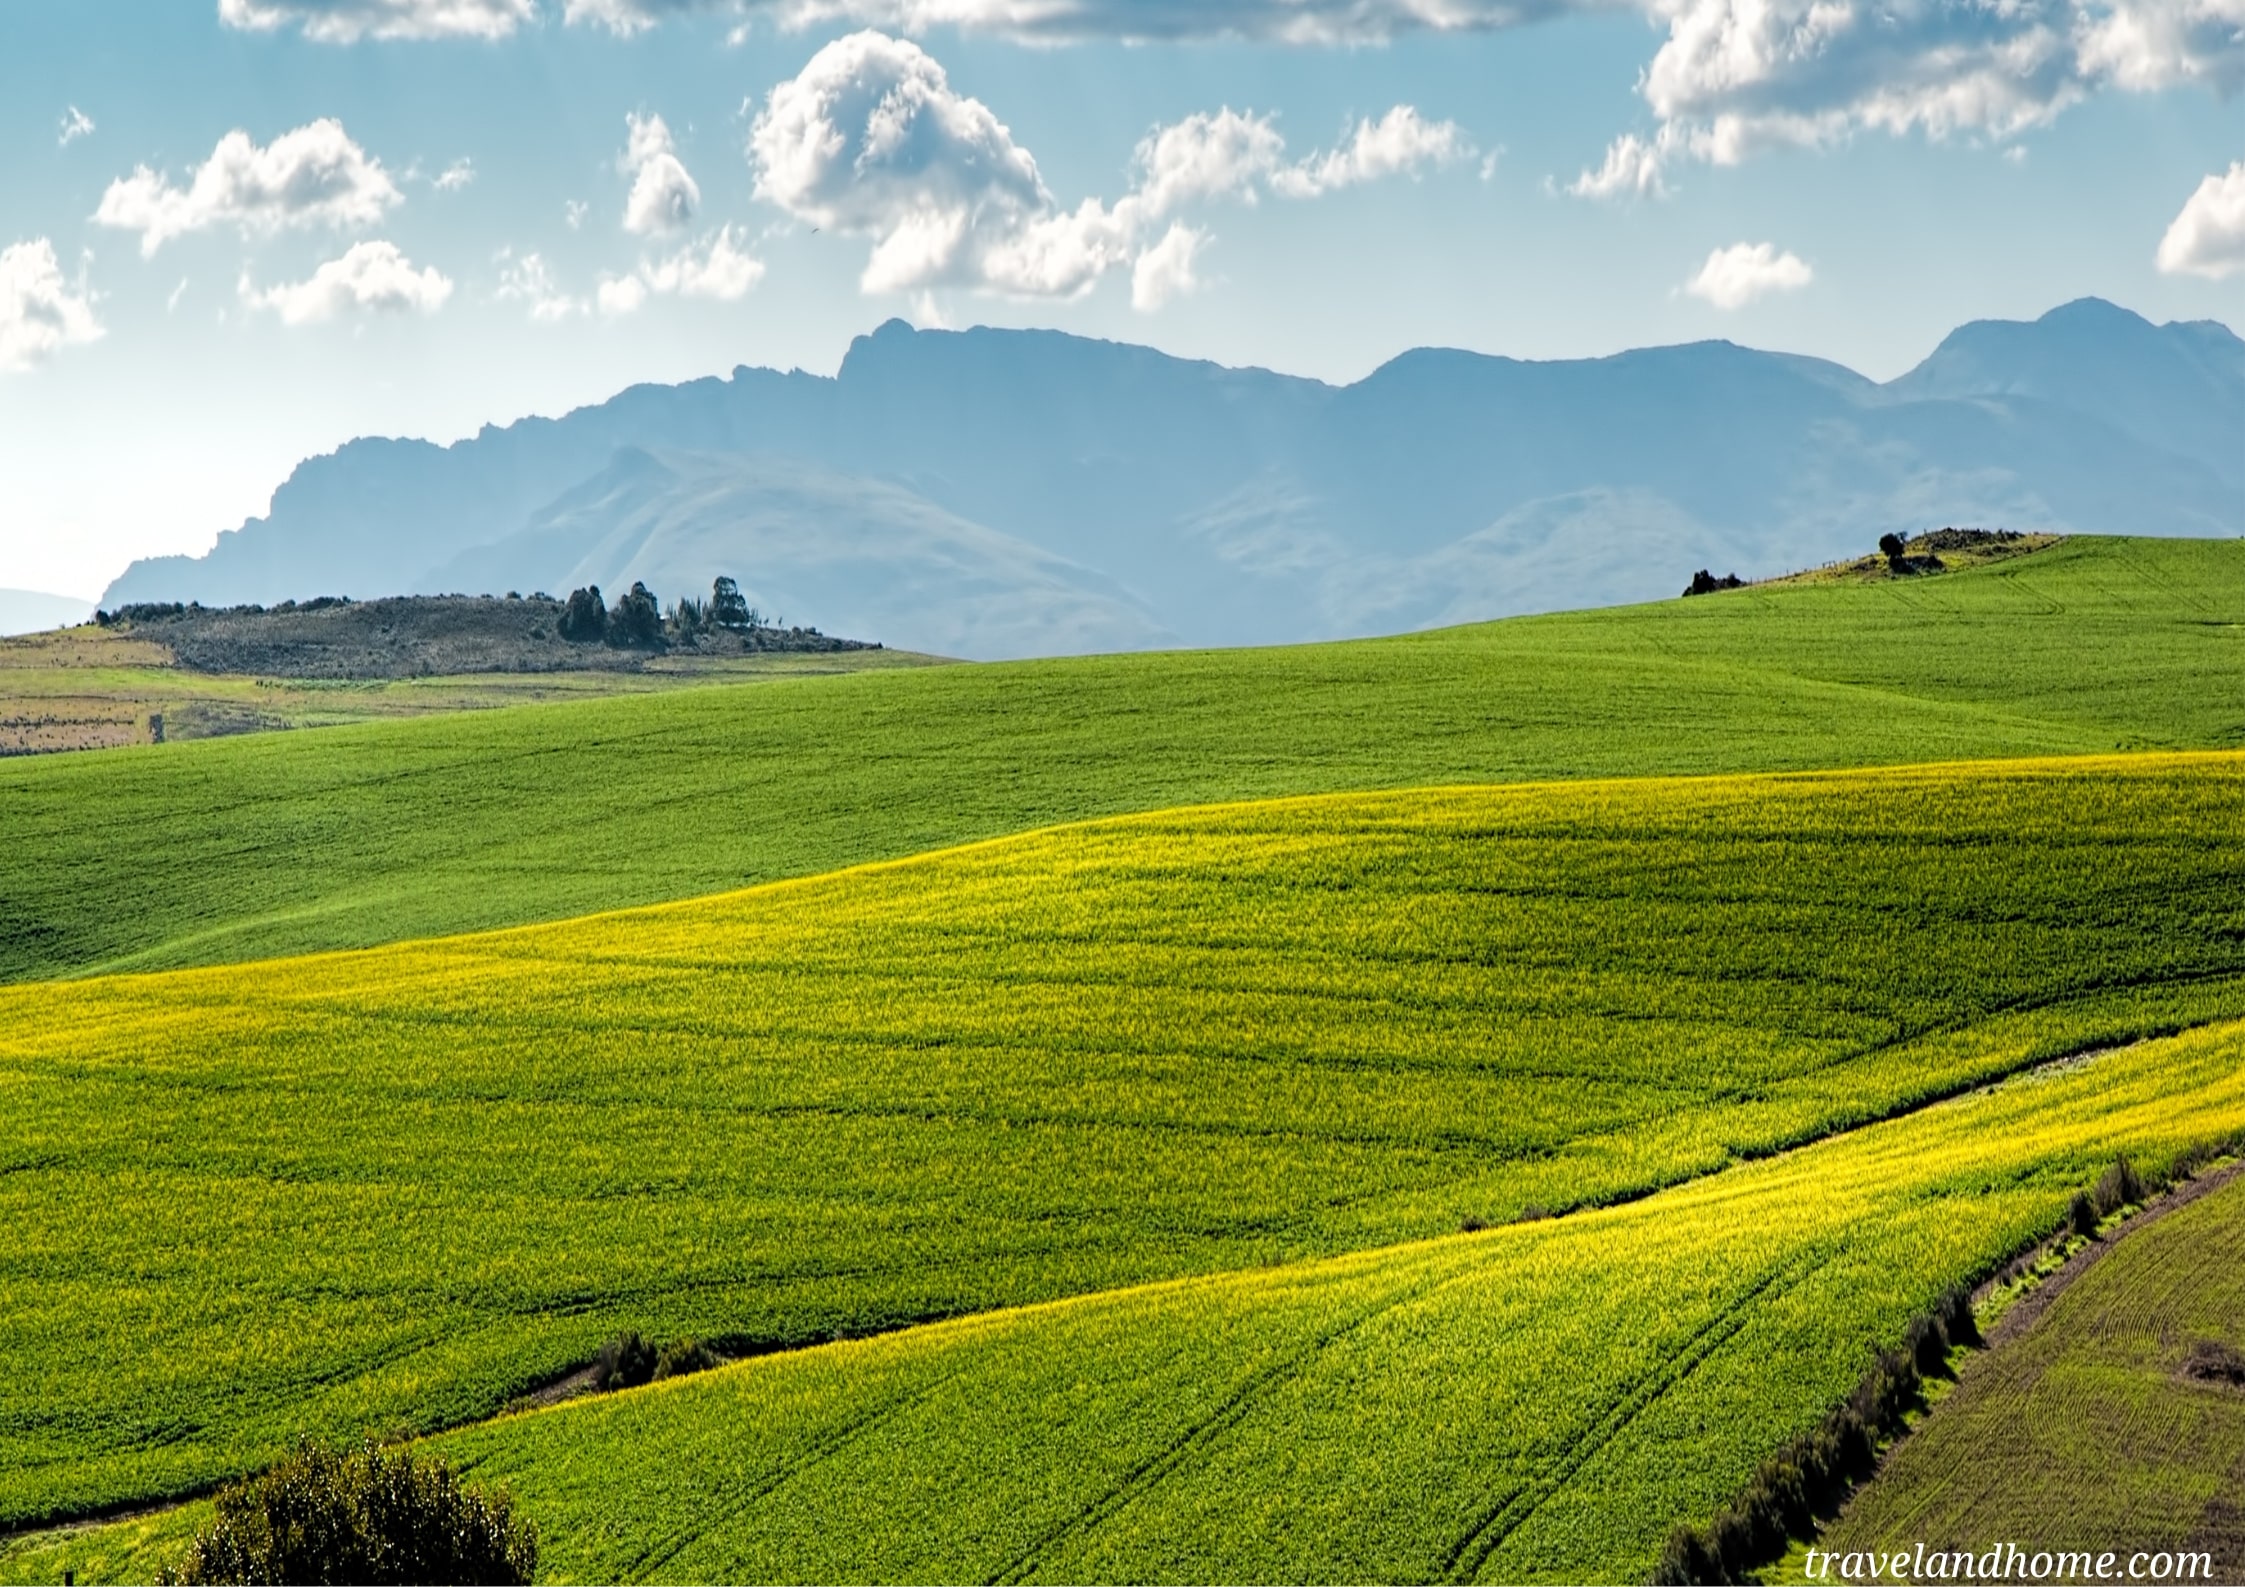 Canola fields in the Overberg region, South Africa min